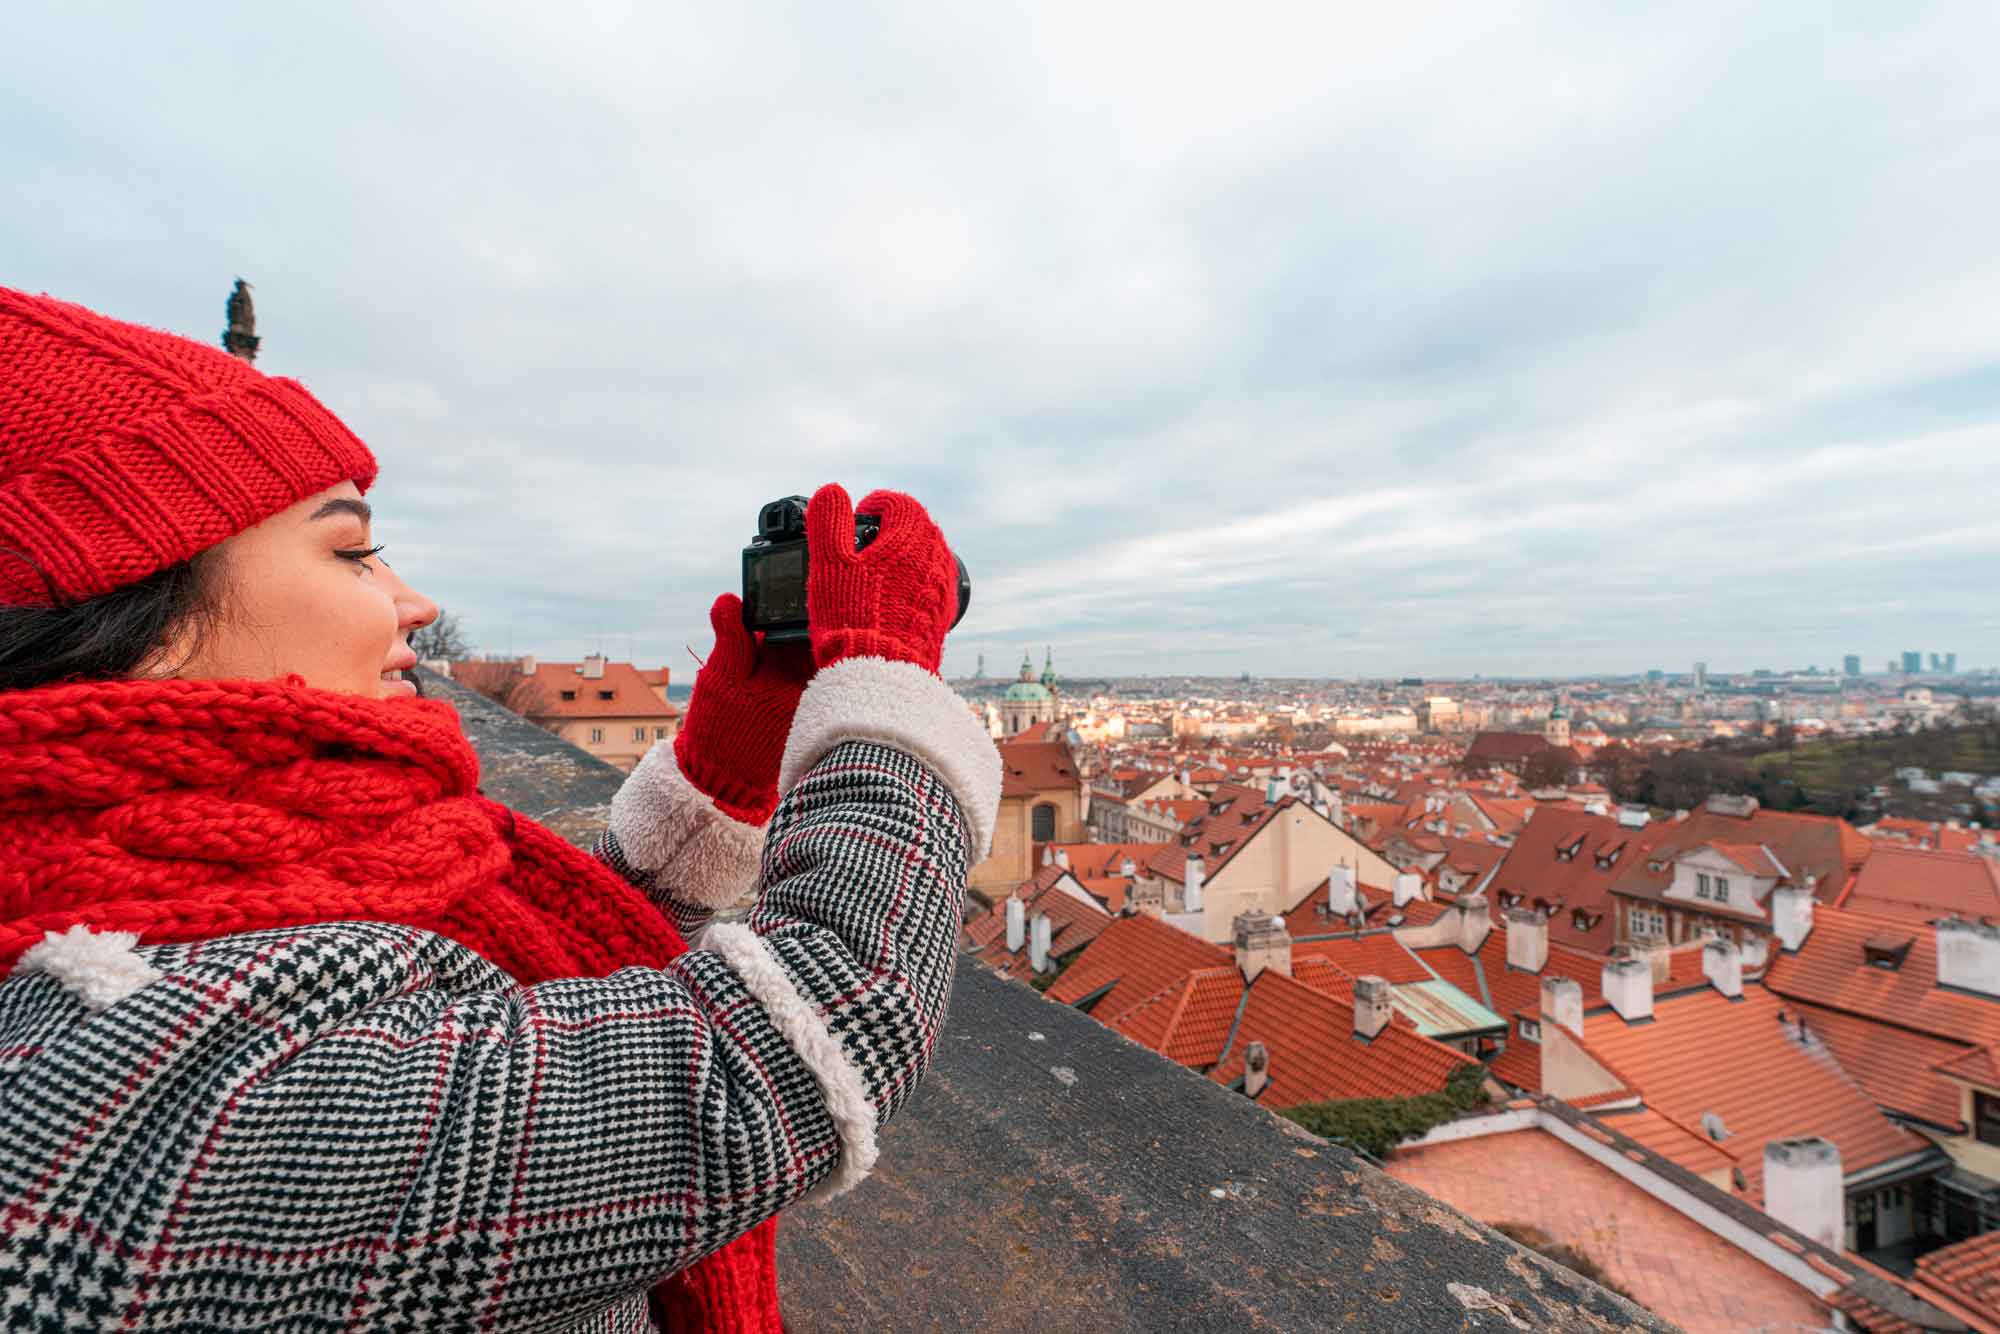 Image of a woman in a red scarf and hat taking Christmas images with a camera on a roof